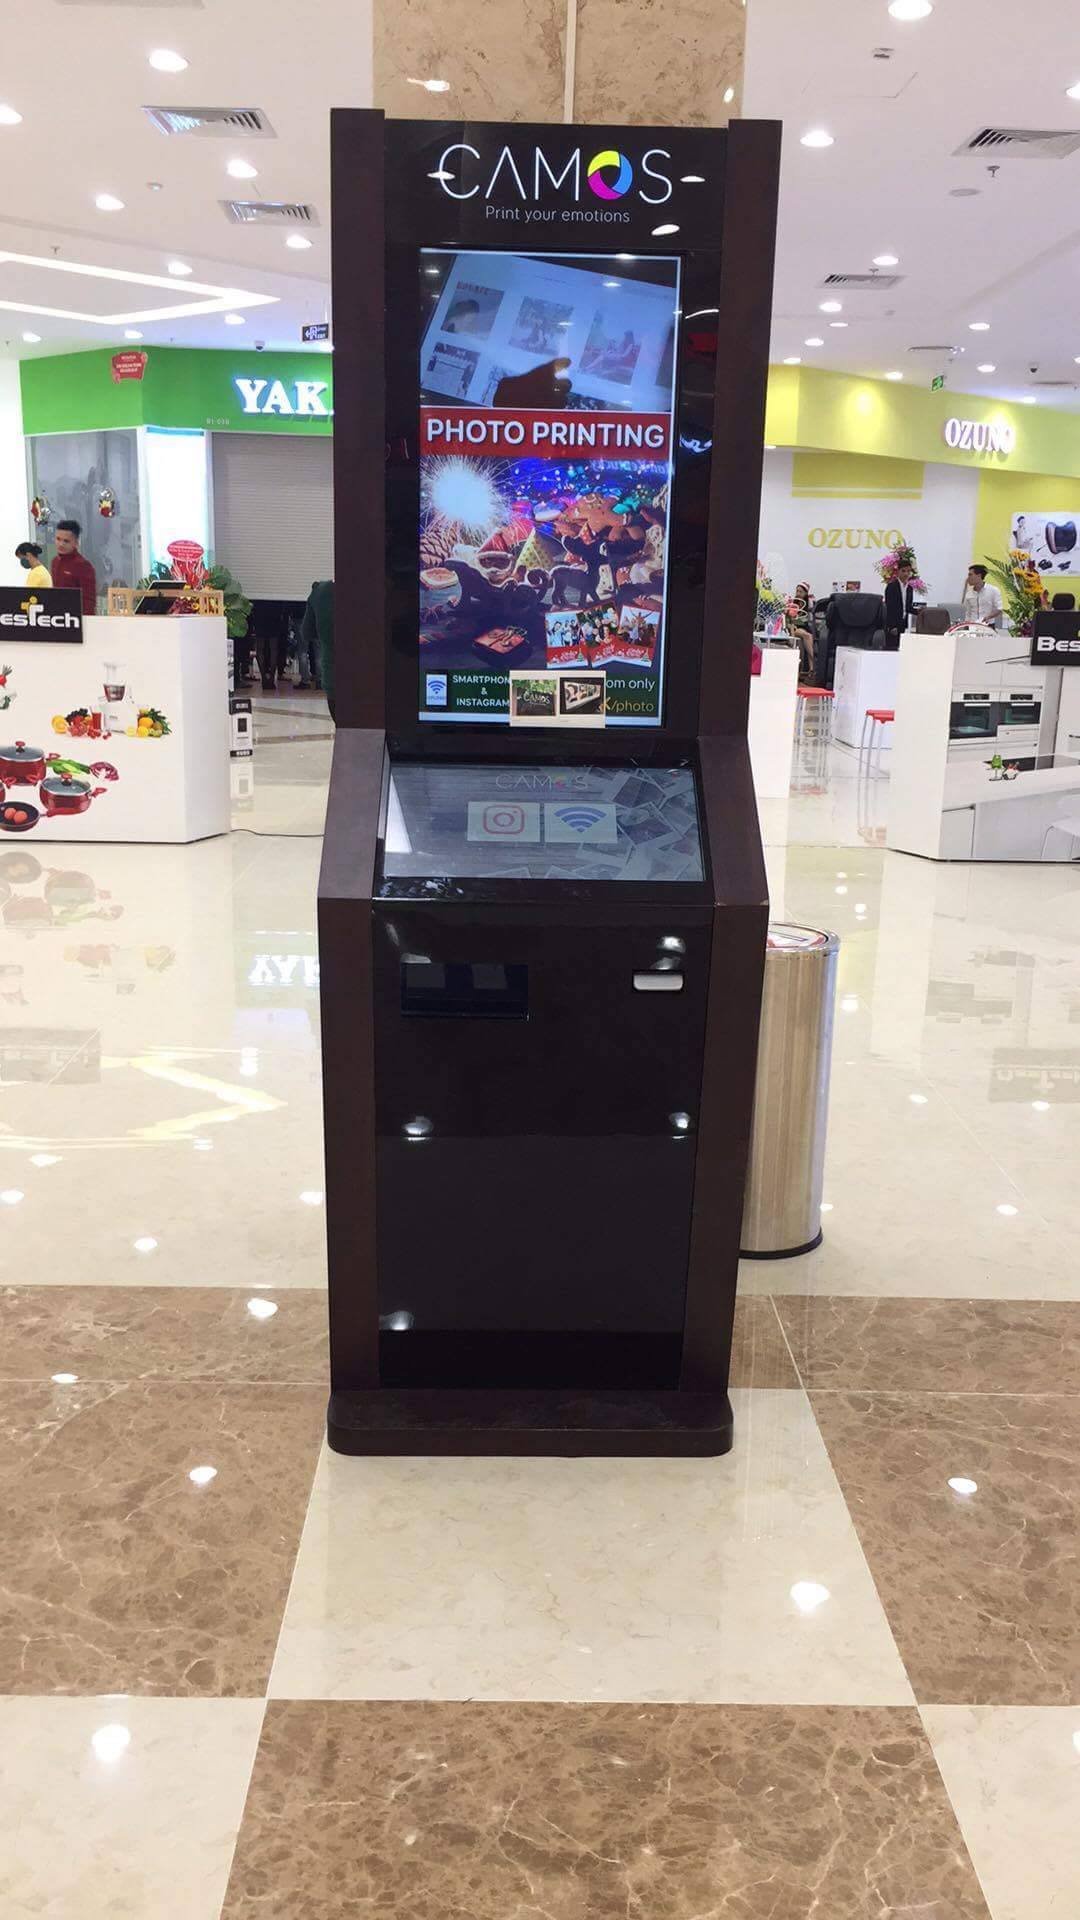 A Camos photo printing kiosk is set up in a mall.